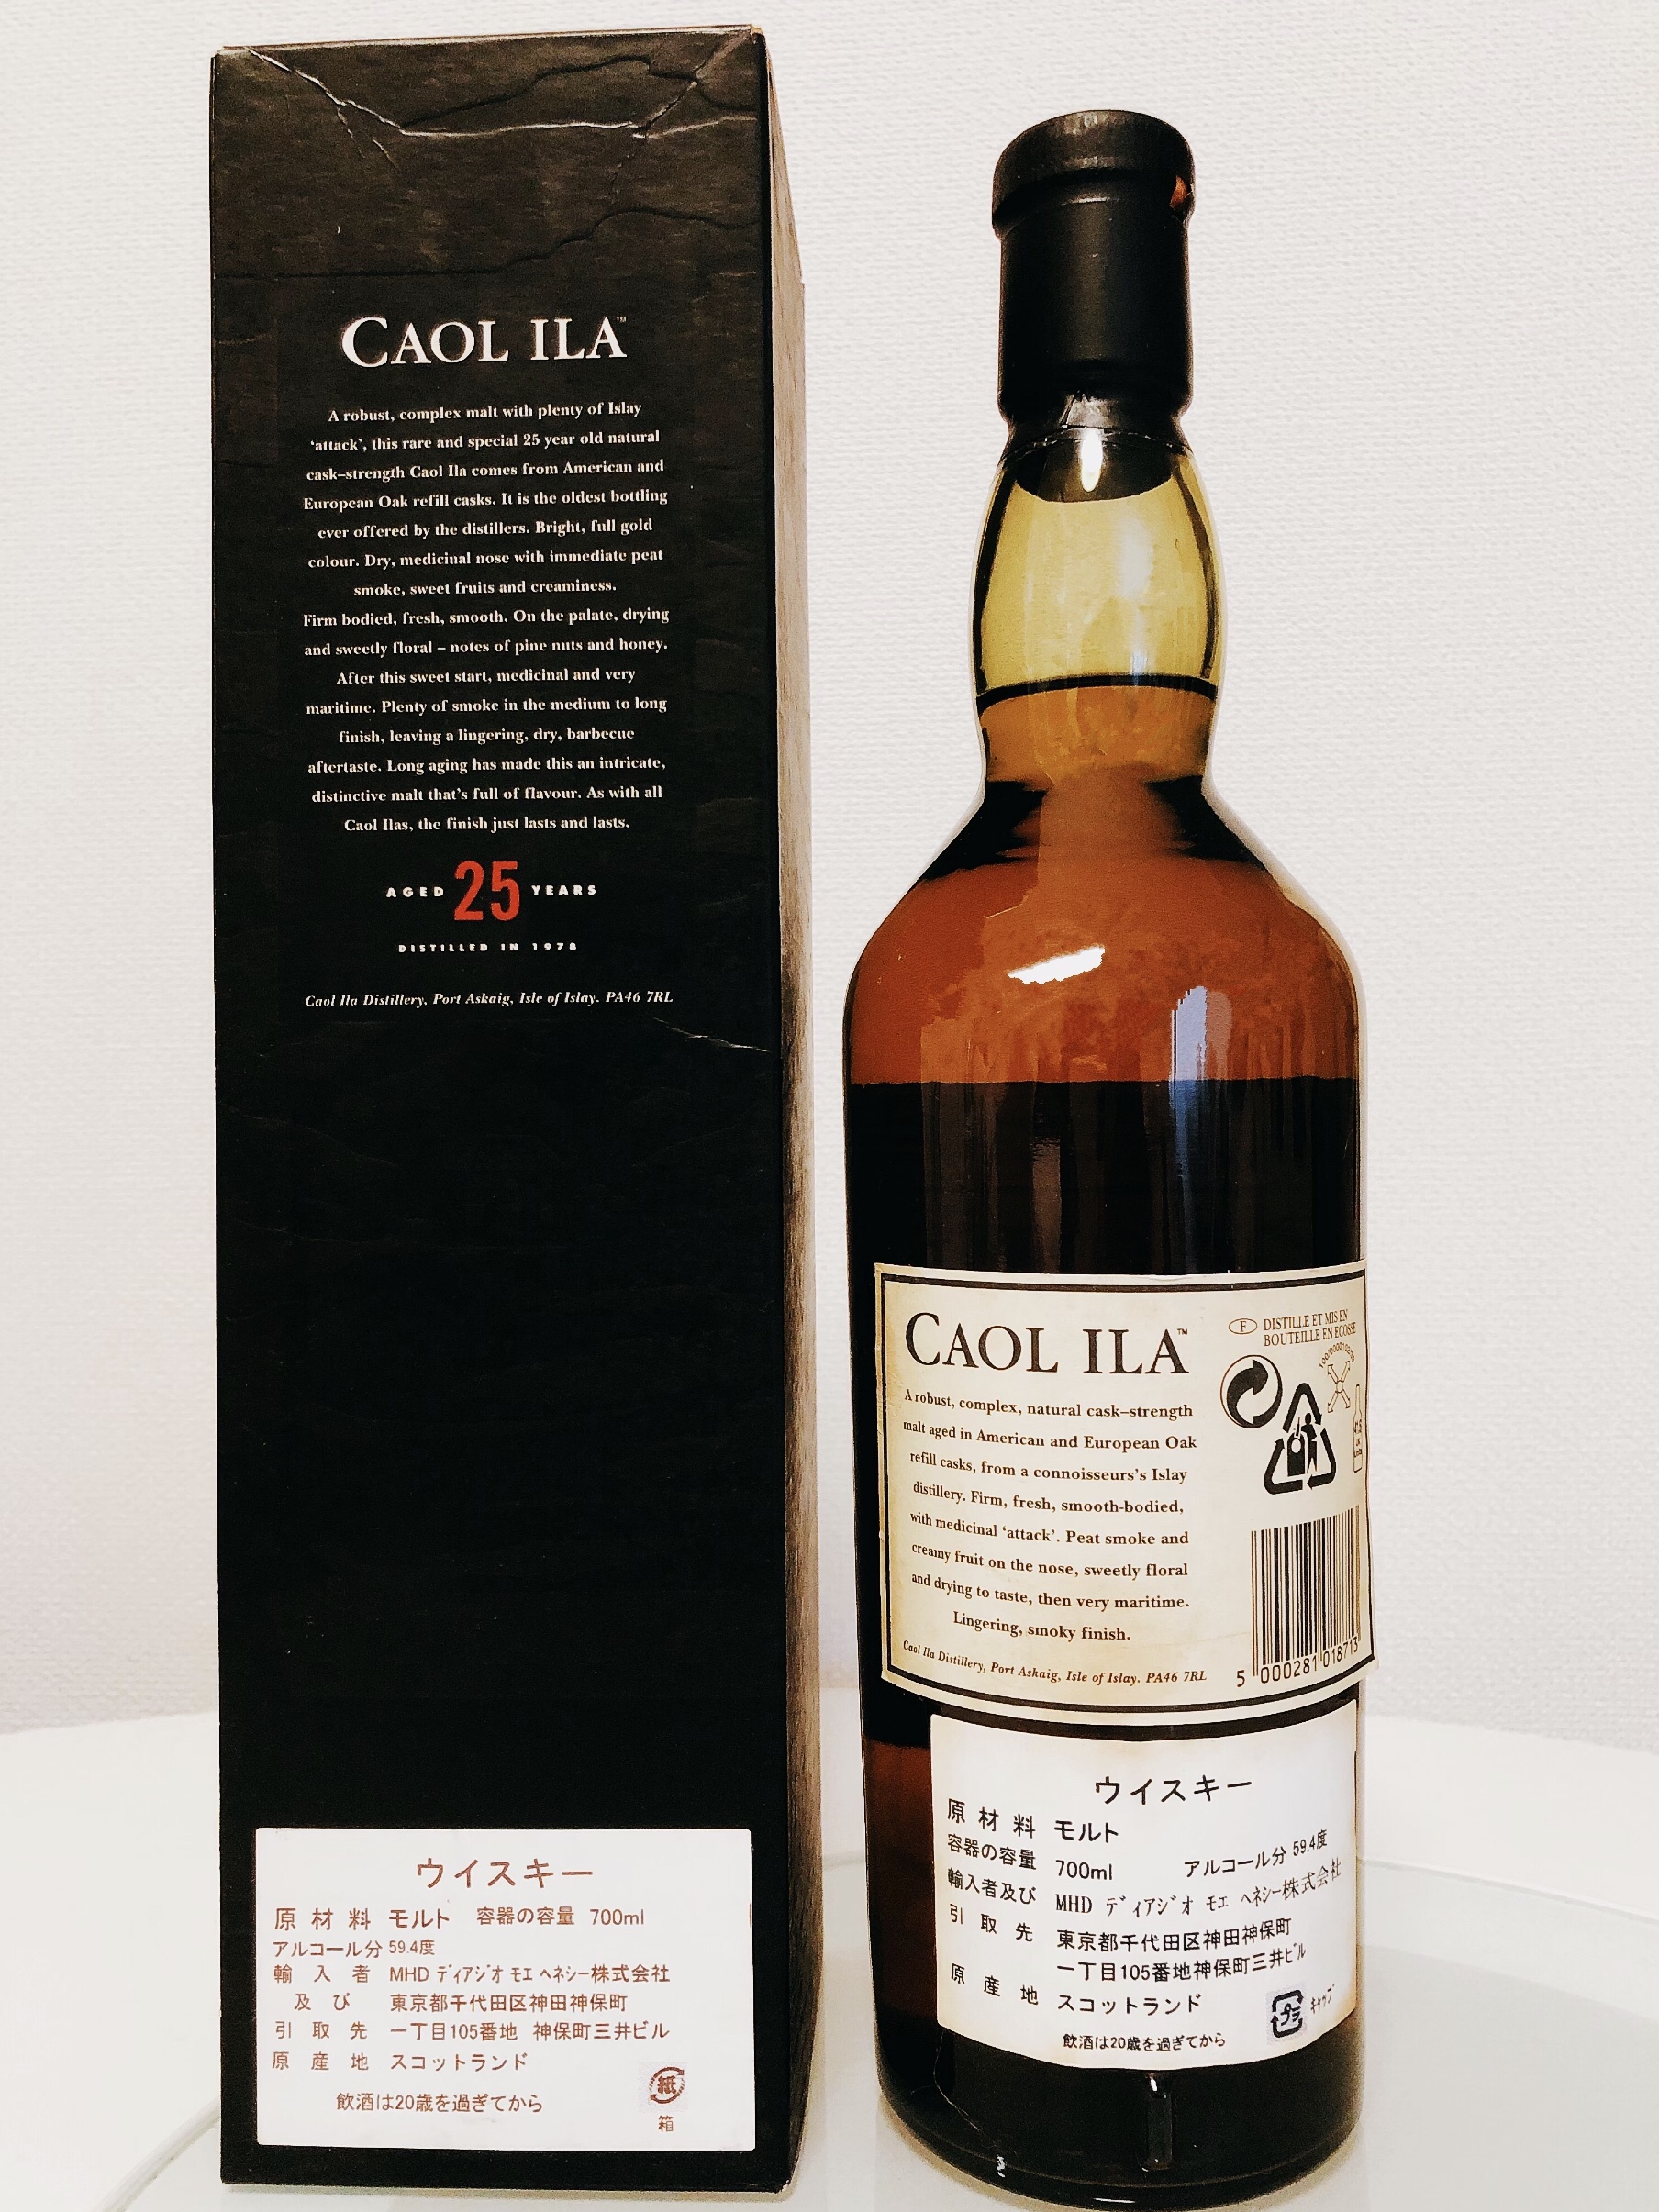 Caol Ila 25 years old Natural Cask Strength 1978 -2004 DB - ウイスキー